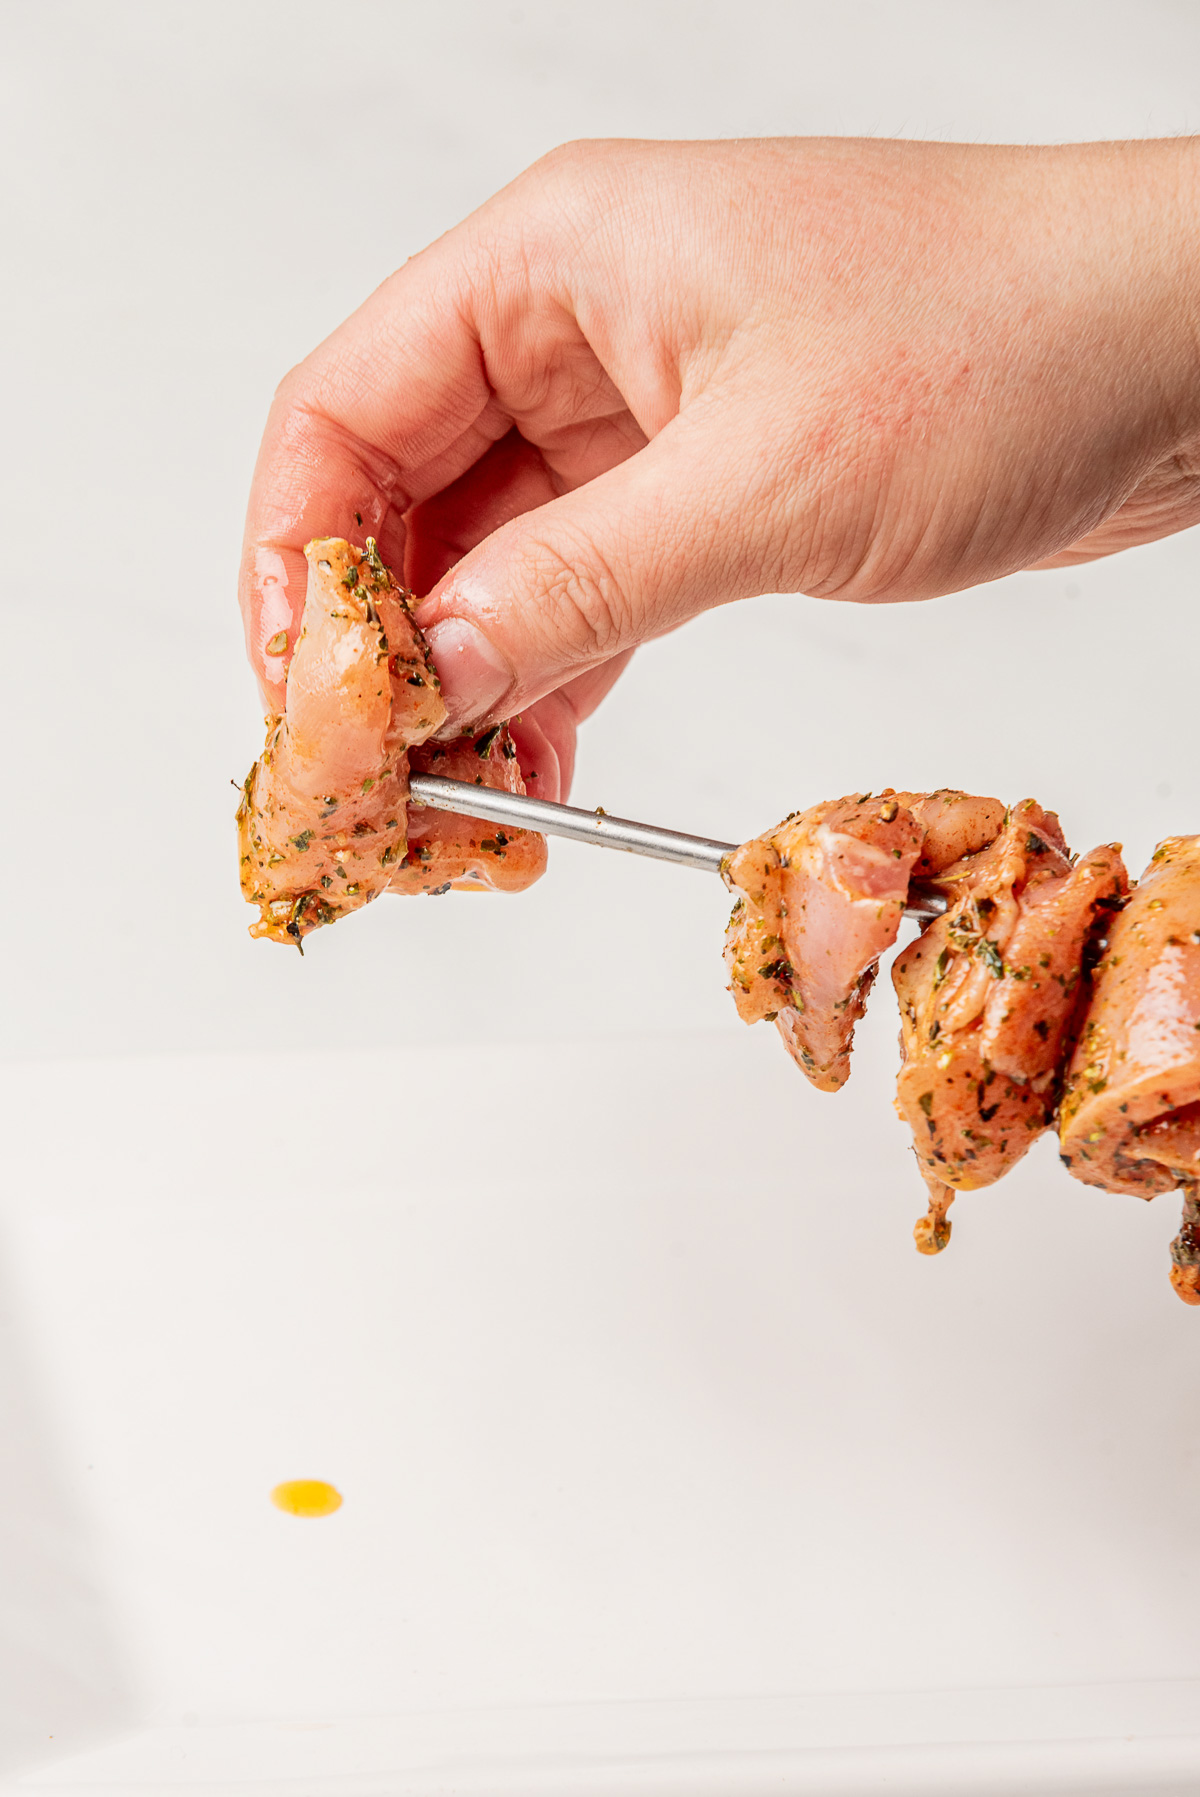 Chicken thighs being added to a metal skewer.